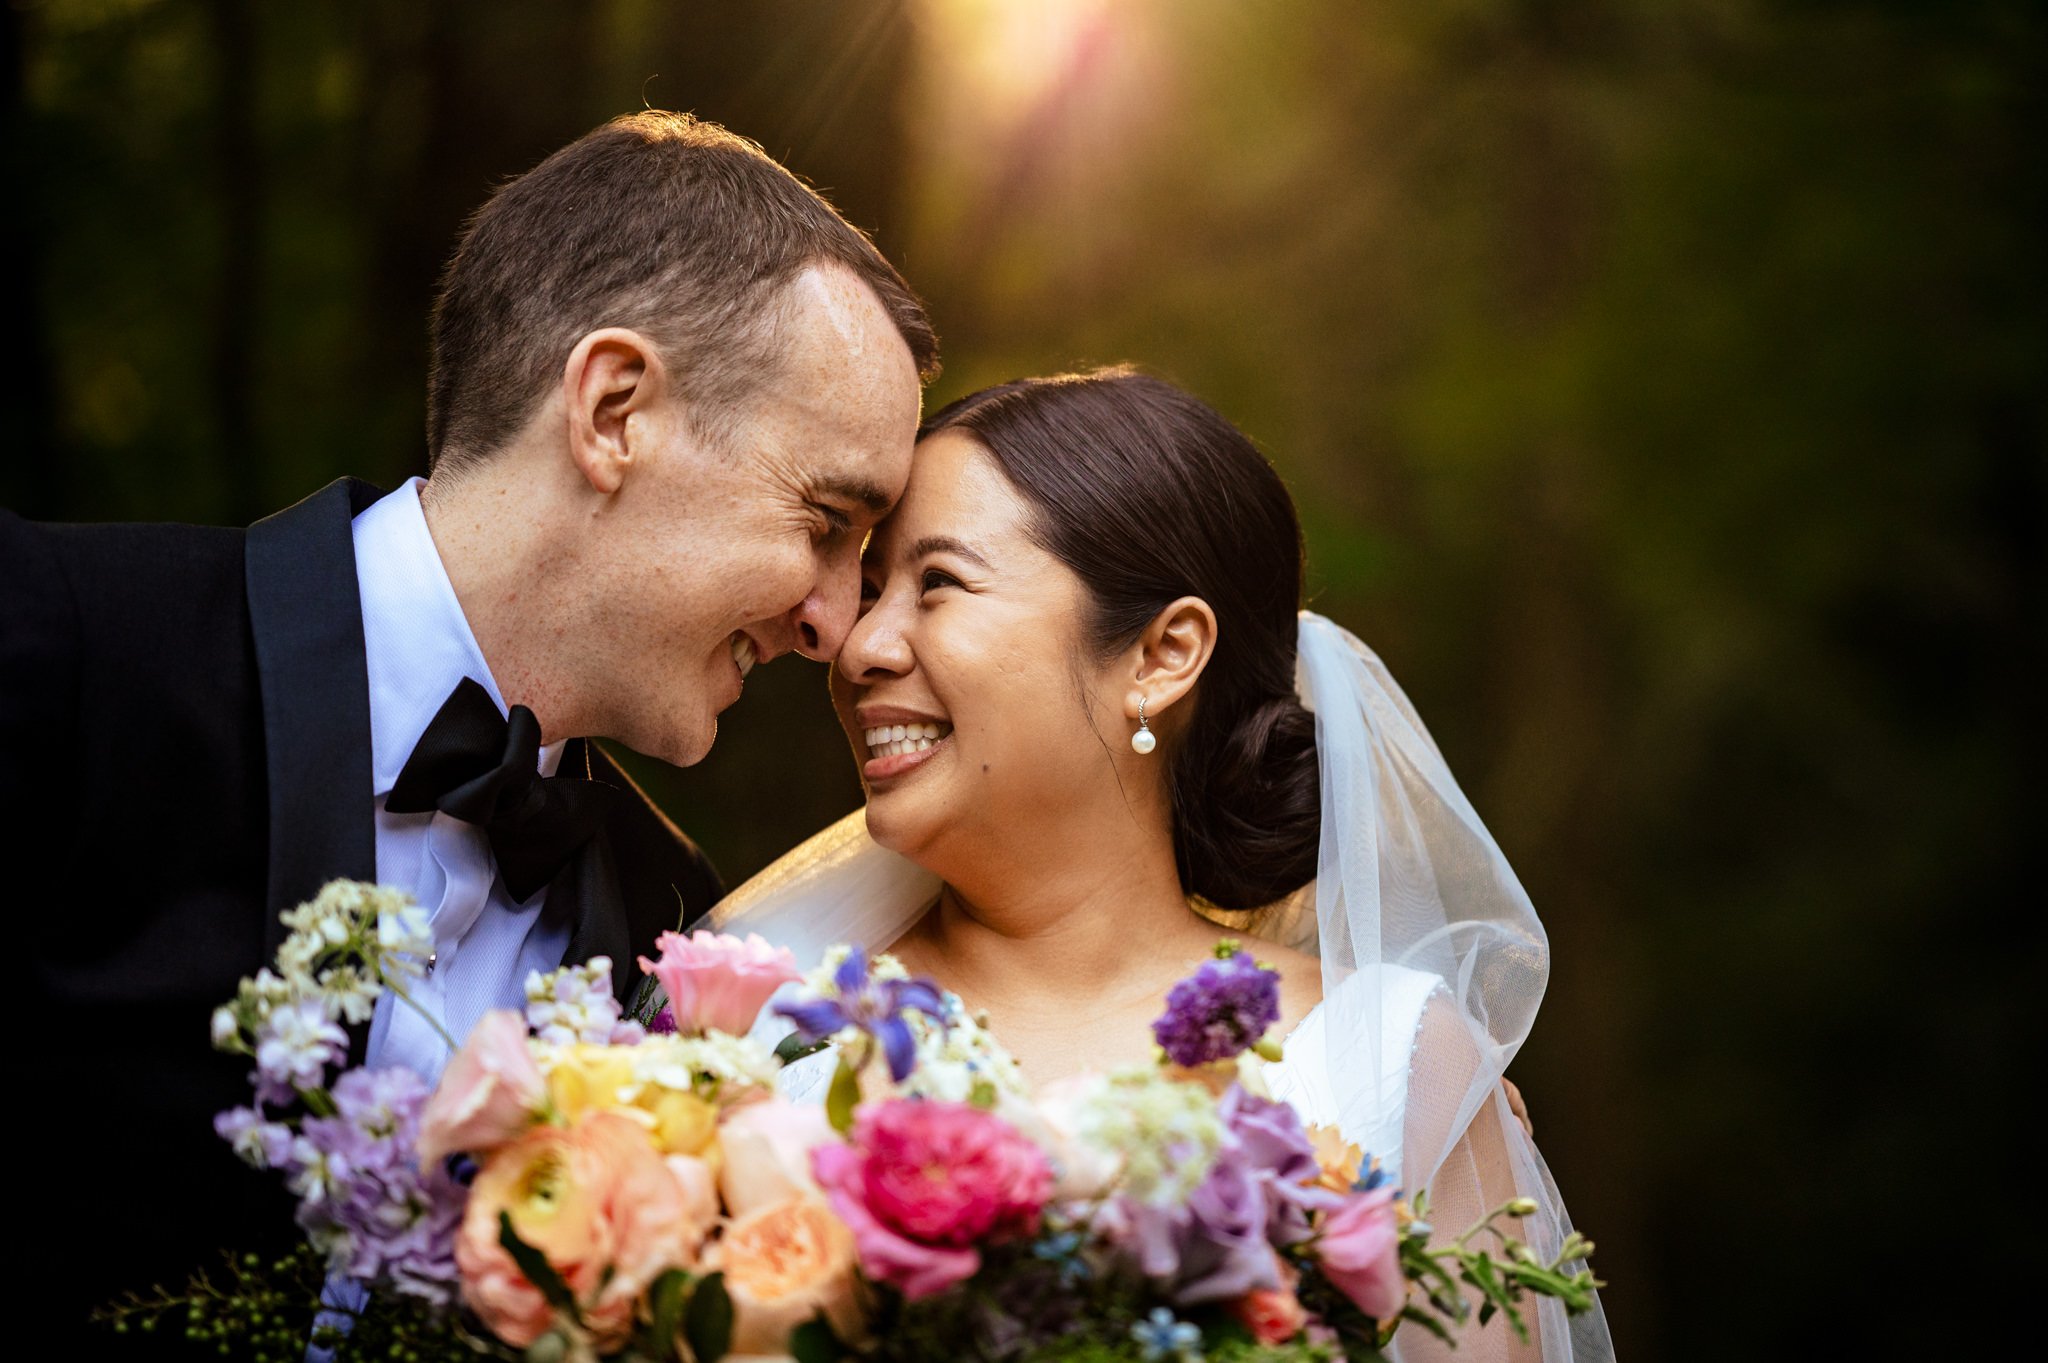 Asheville NC wedding photographer captures a tender kiss between bride and groom in the enchanting woods.